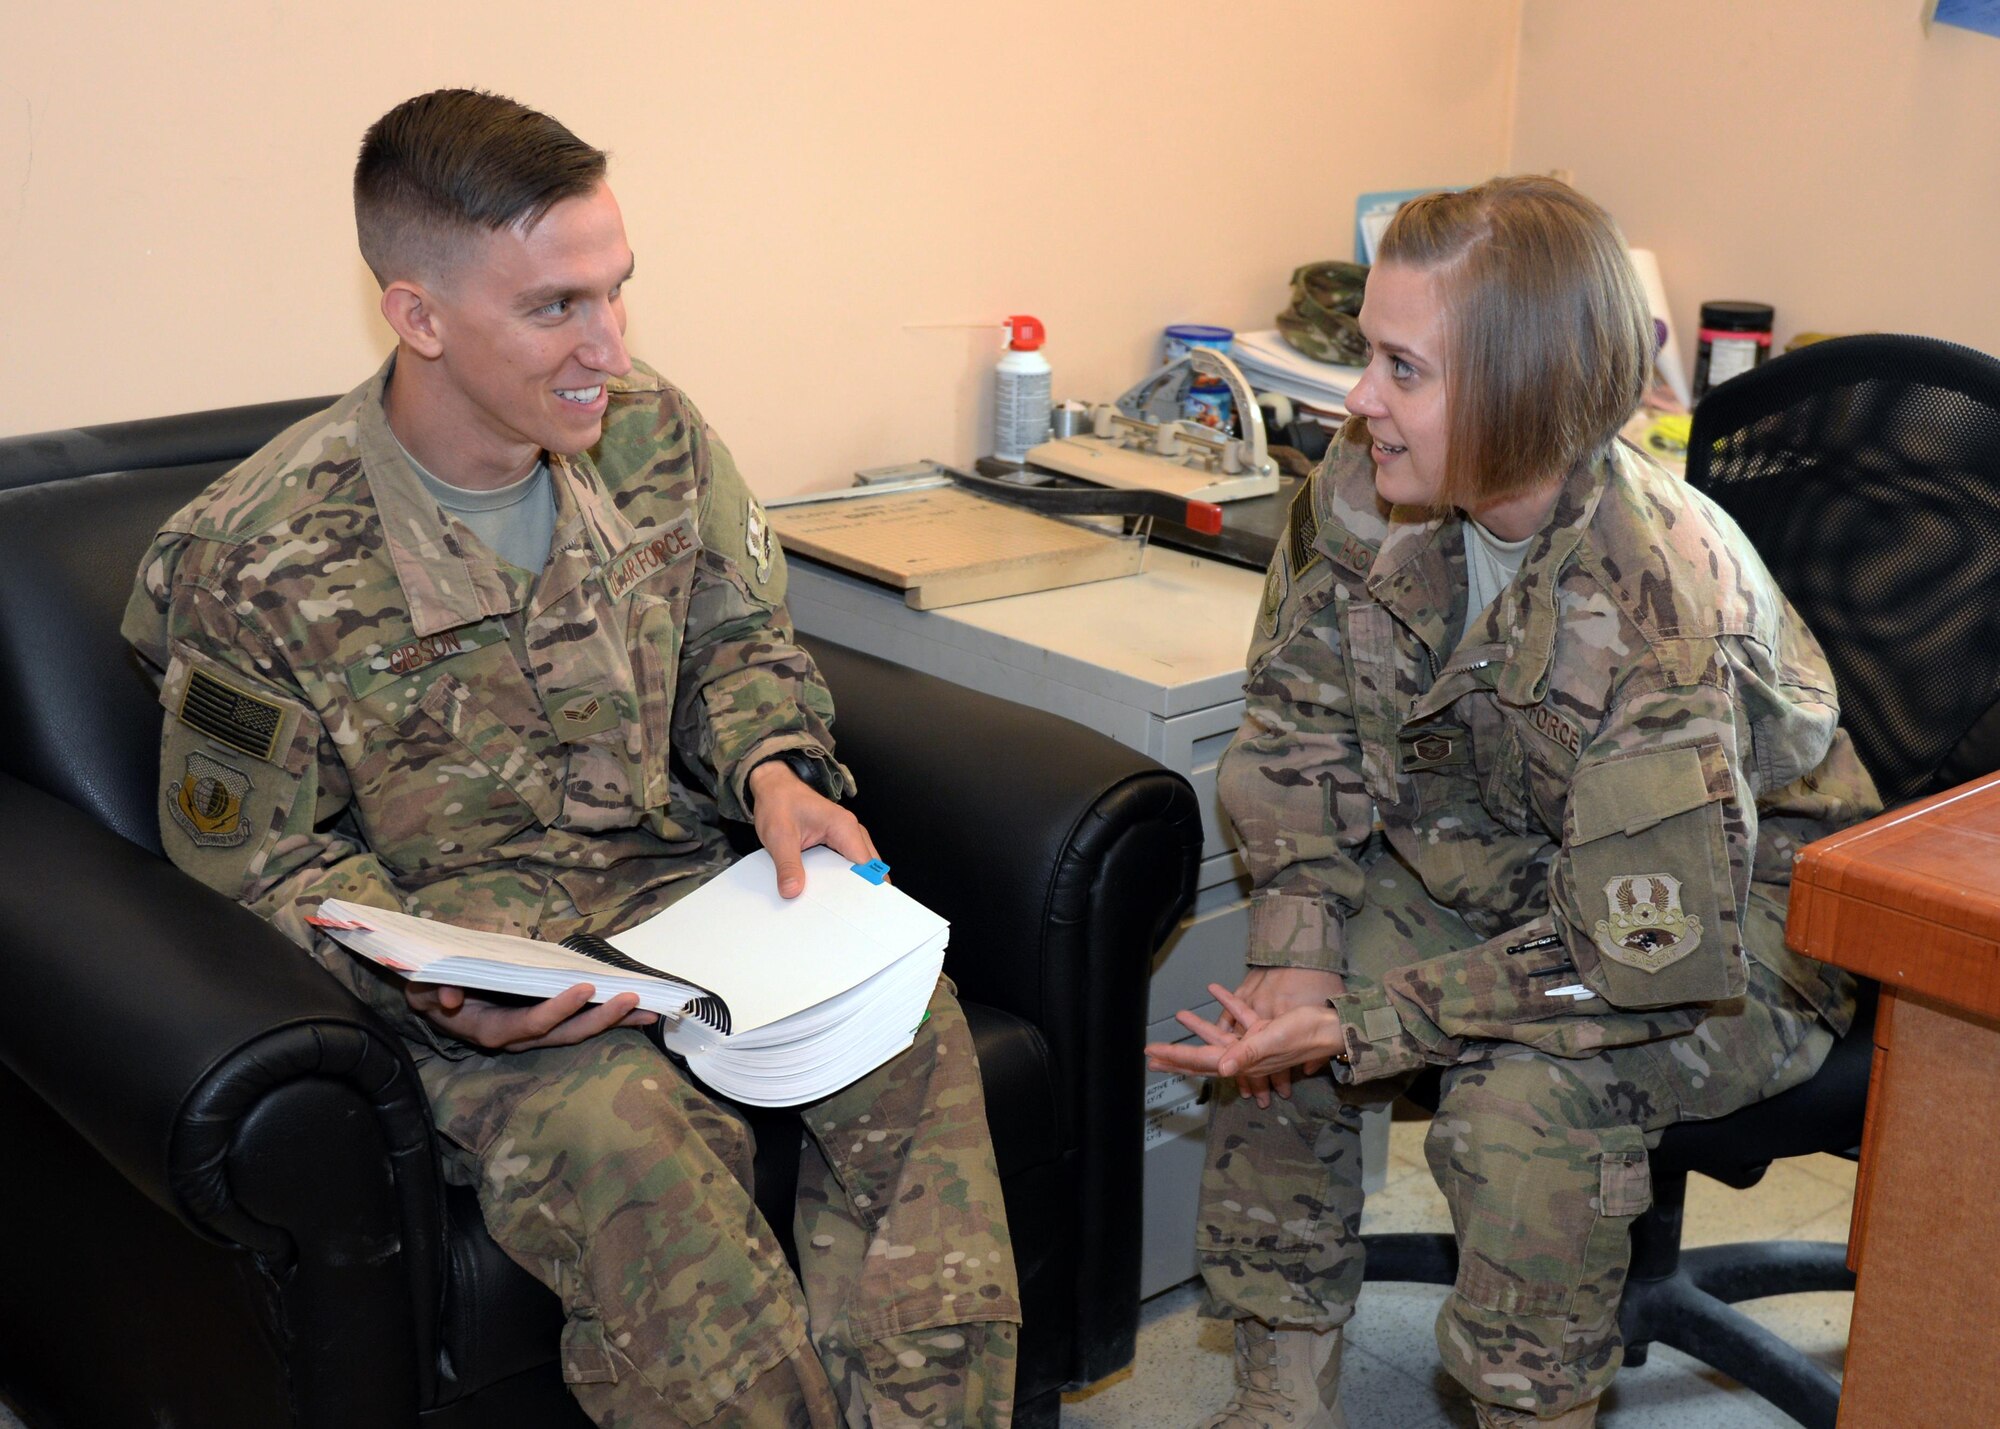 U.S. Air Force Master Sgt. Natasha Hoglund, 455th Air Expeditionary Wing Legal Office superintendent, gives legal advice to Senior Airman Cory Gibson, 455th AEW Finance Office customer service technician, July 18, 2015, at Bagram Airfield, Afghanistan. The legal office is here to help military members with legal issues they may be dealing with at home and here in the AOR. (U.S. Air Force photo by Senior Airman Cierra Presentado/Released)